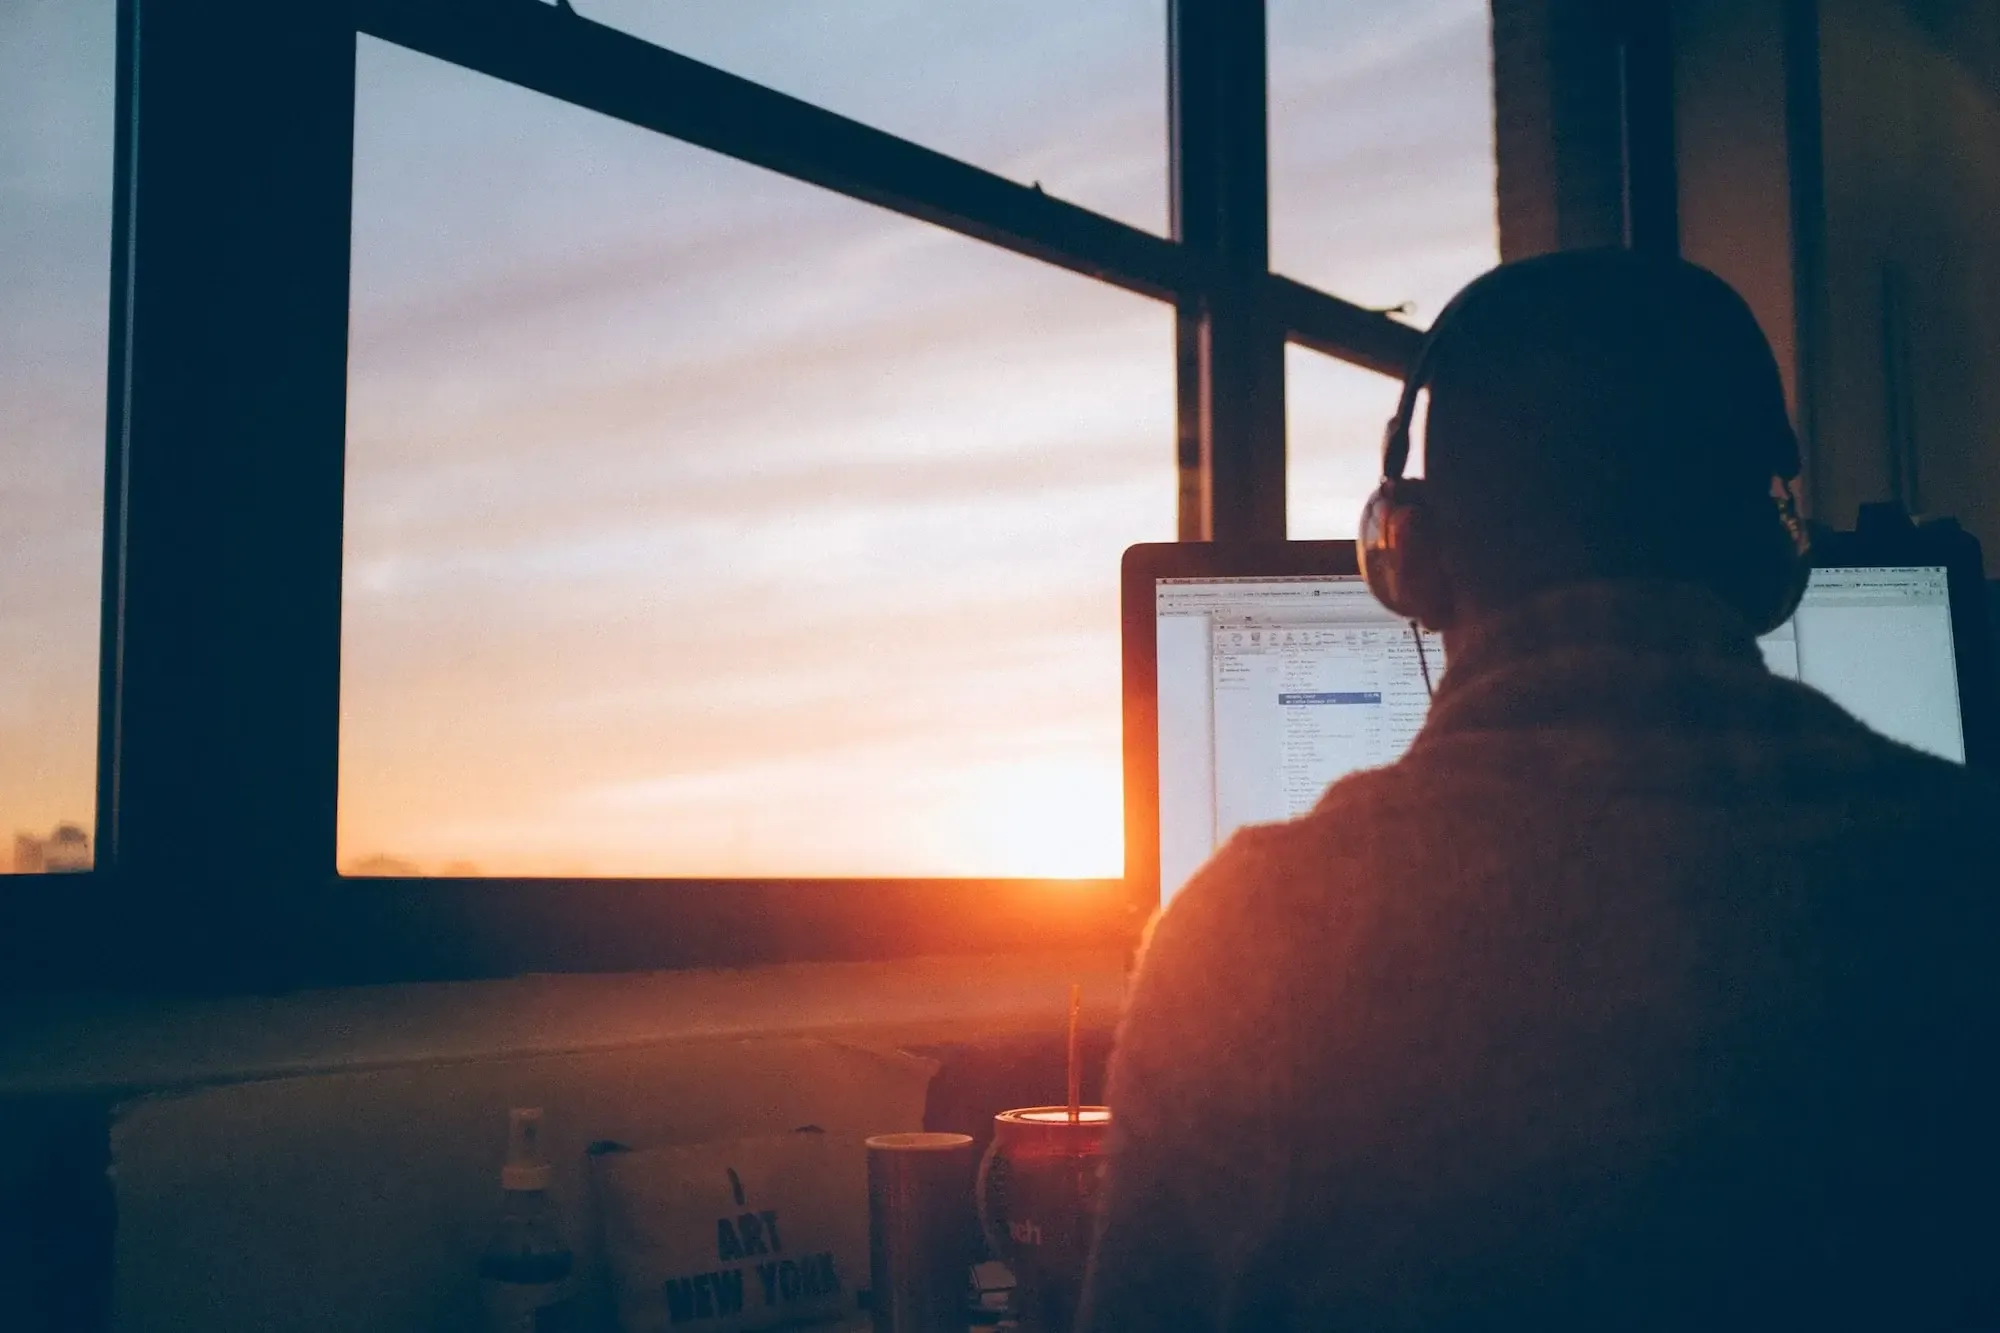 Remote worker seen from the back sitting at his desk by the window, sun goes down